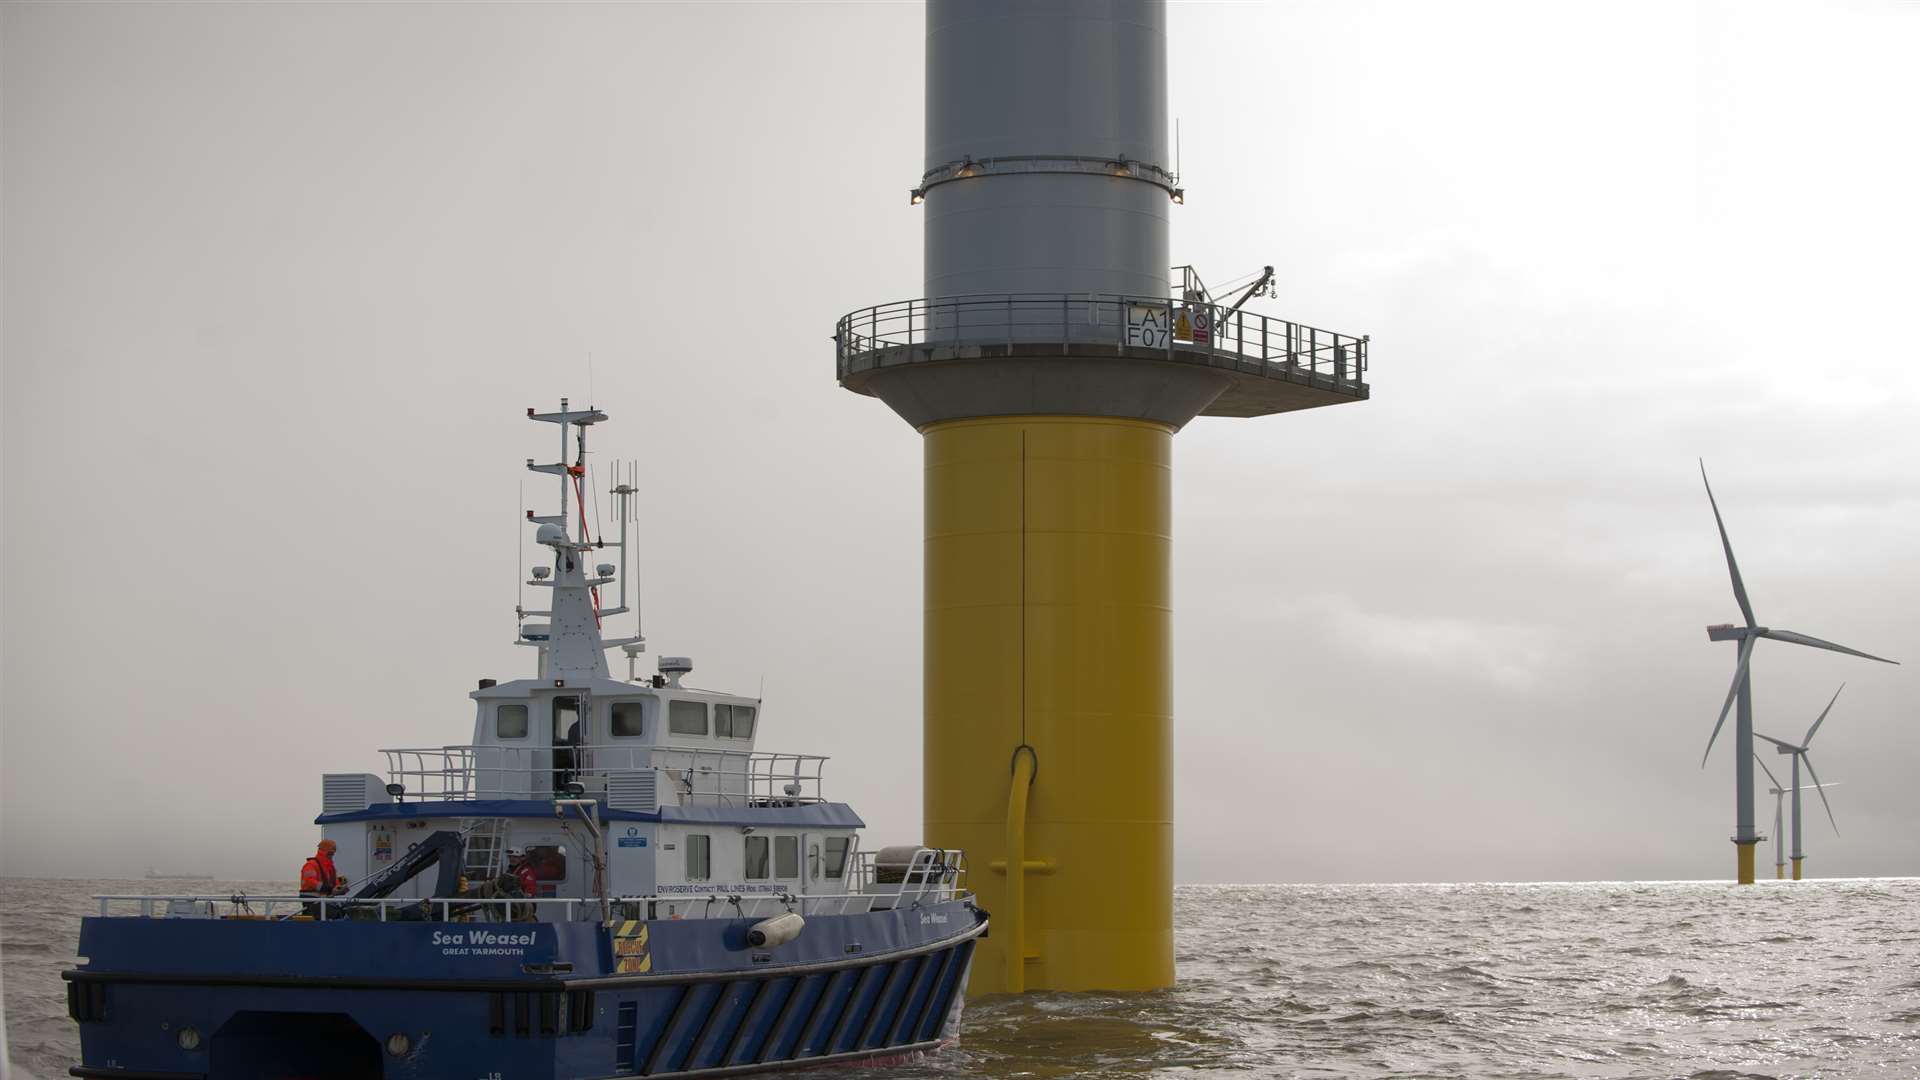 Ships servicing the London Array wind farm in the Thames Estuary operate out of Ramsgate